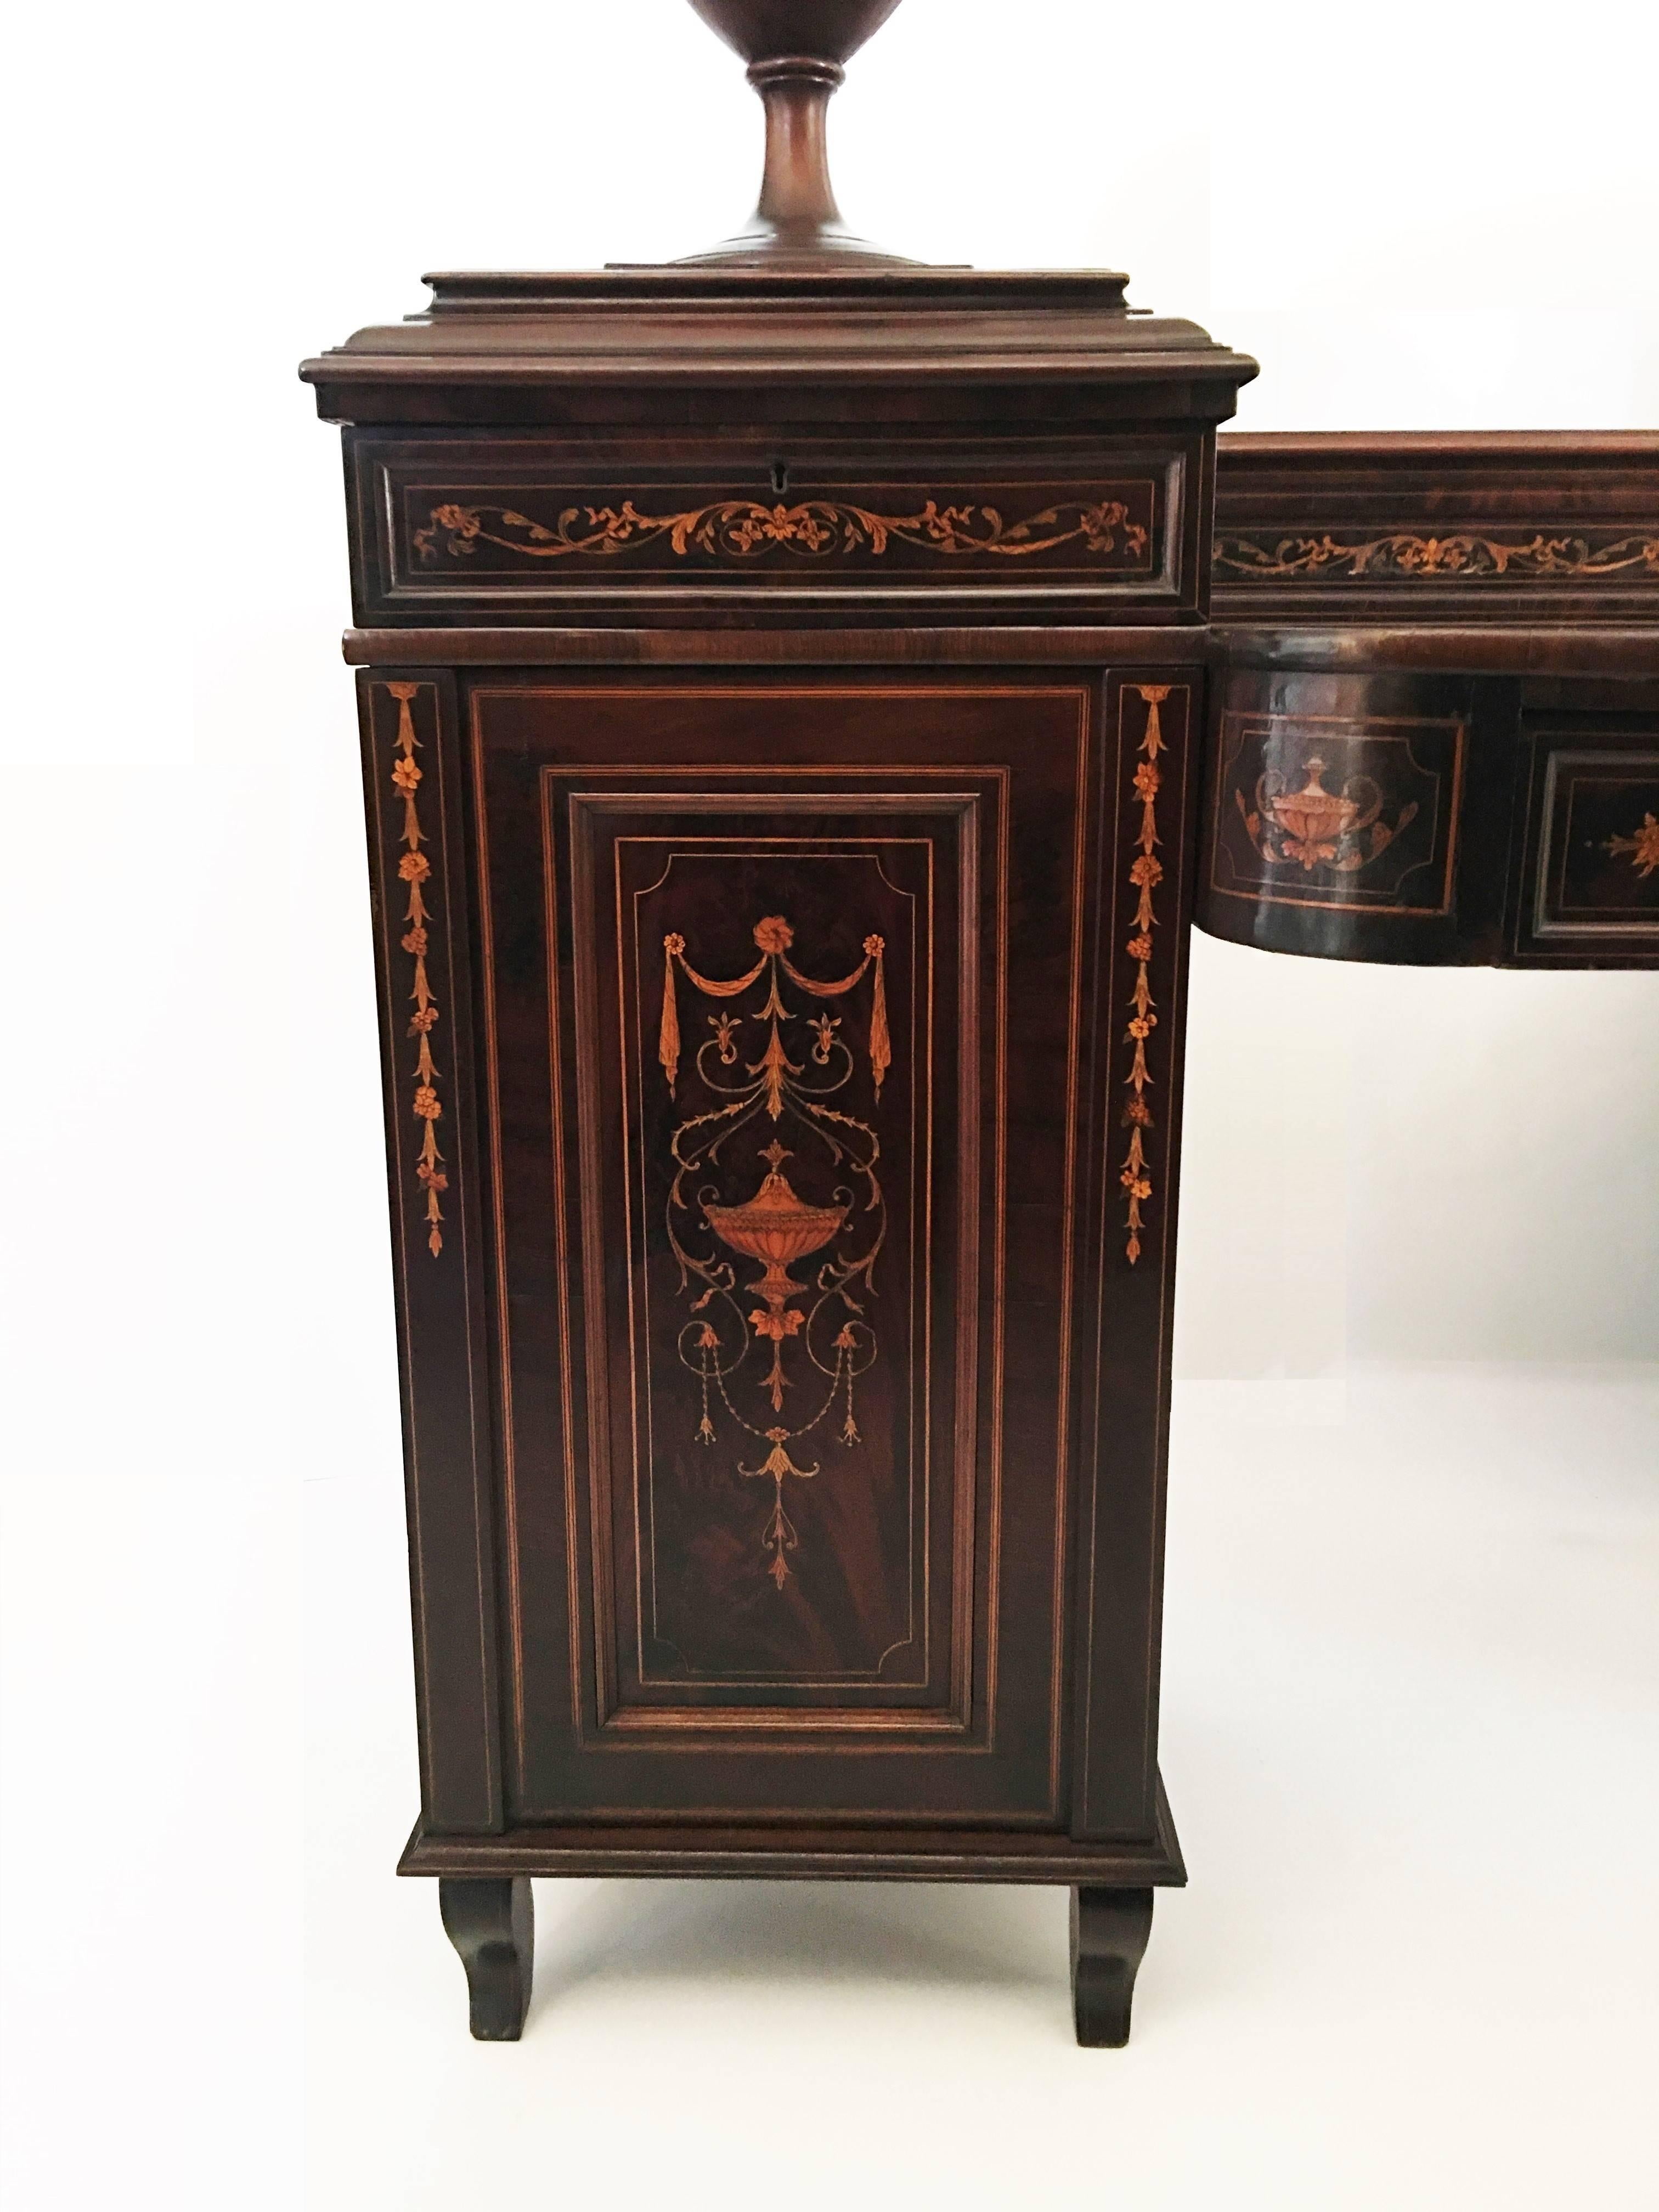 Early 19th Century Regency Marquetry Inlaid Rosewood Pedestal Sideboard with Urn For Sale 2